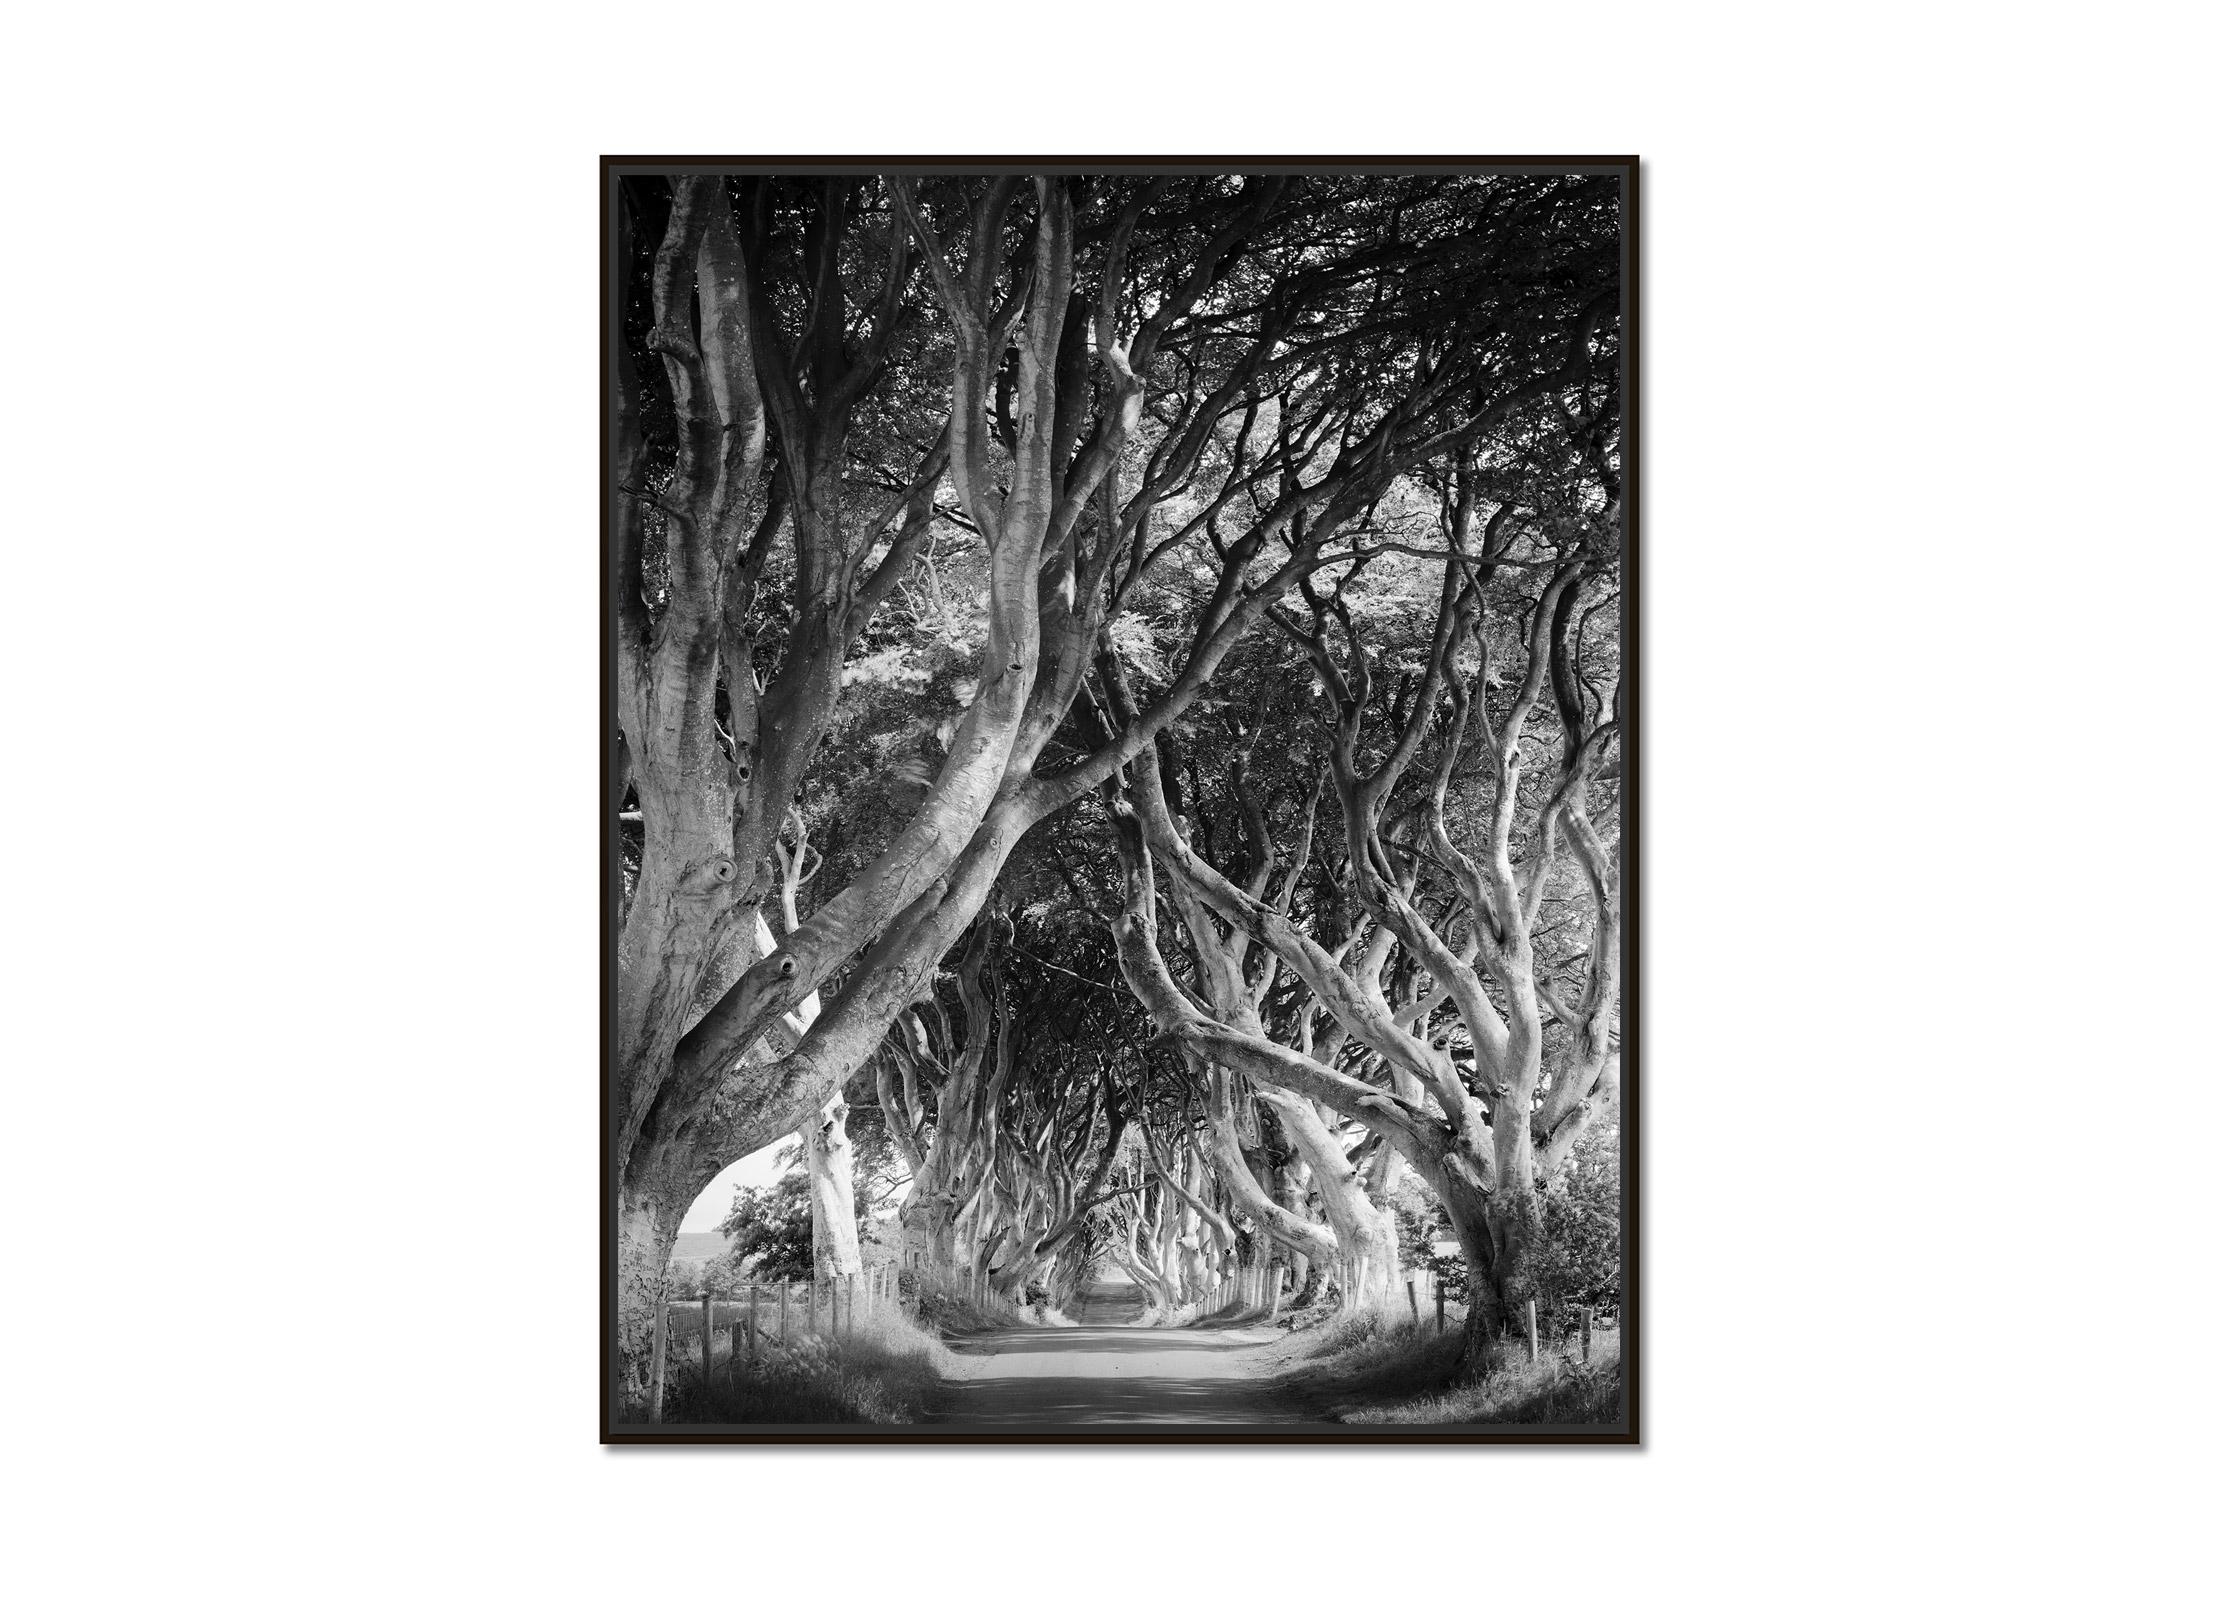 Dark Hedges, tree avenue, mystical forest, black & white landscape photography - Photograph by Gerald Berghammer